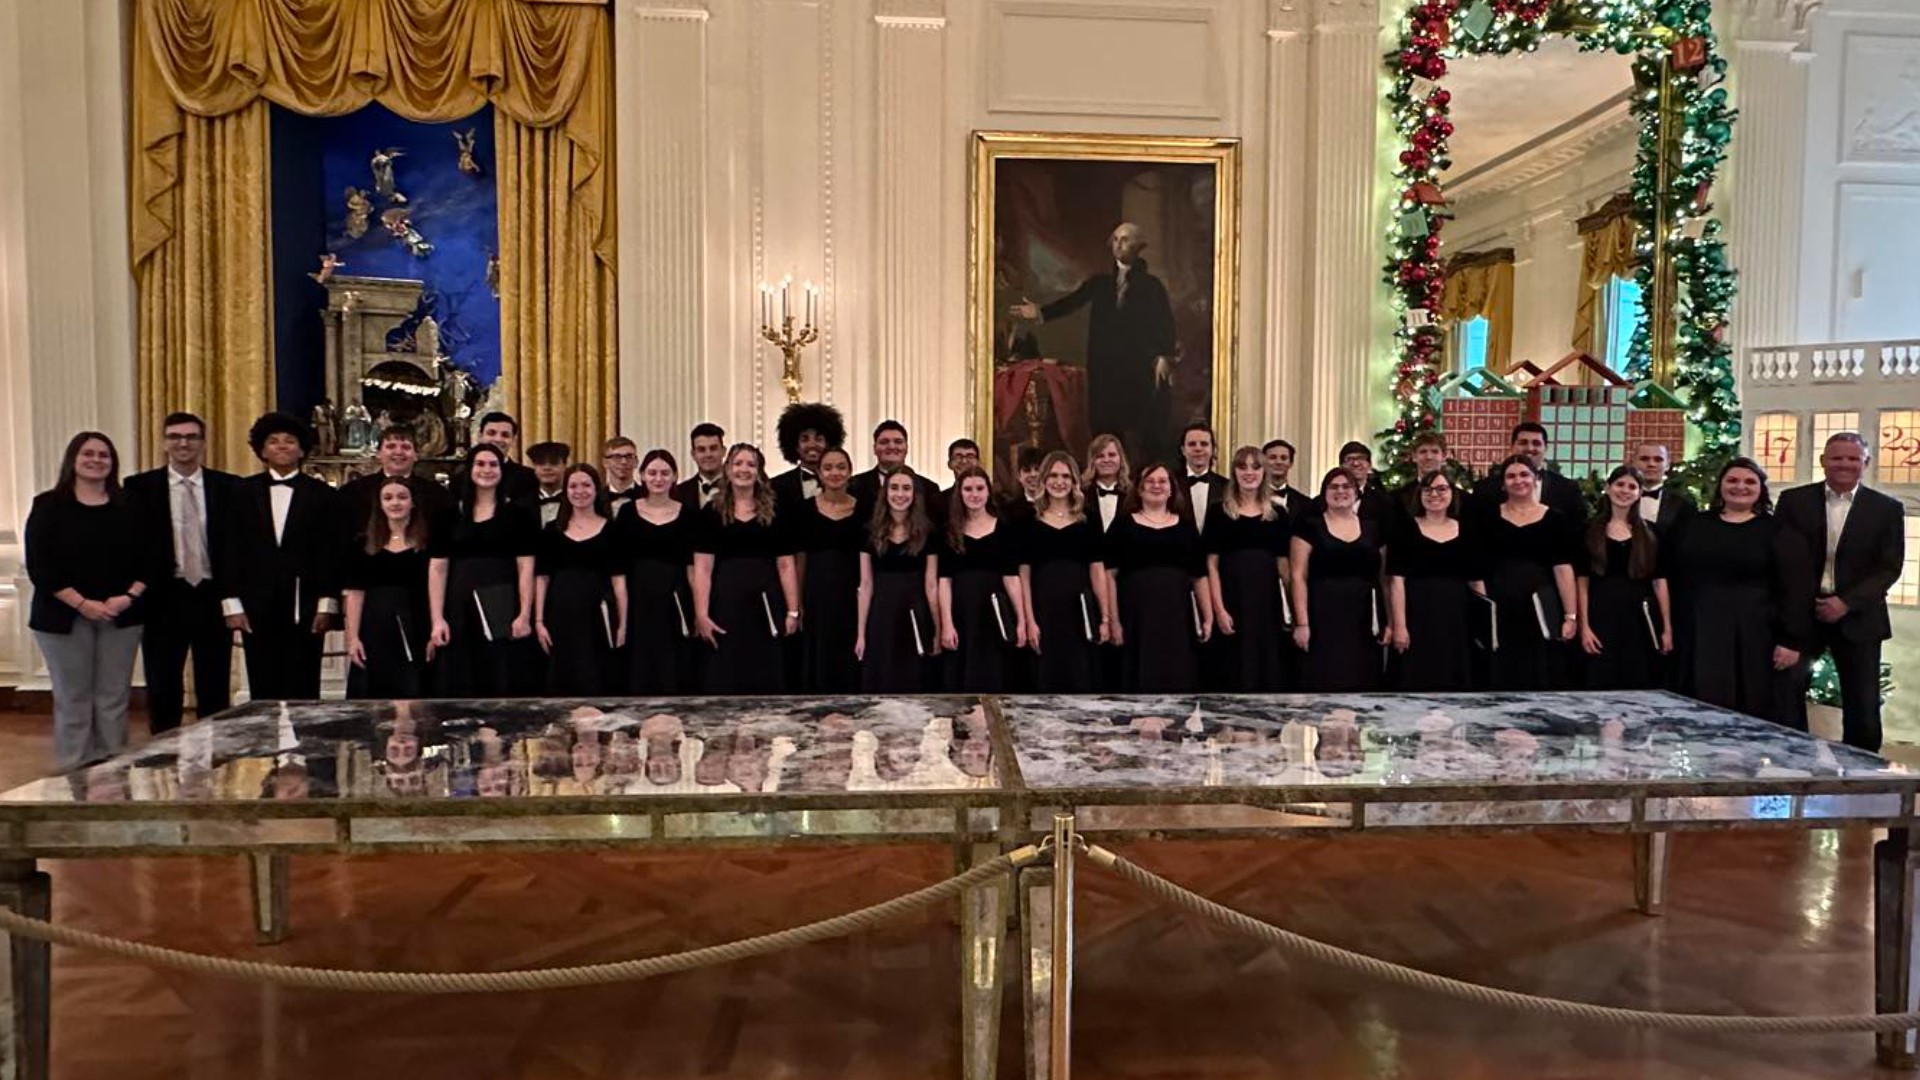 The trip featured an appearance at the White House, where students sang in front of hundreds of visitors and staff members.